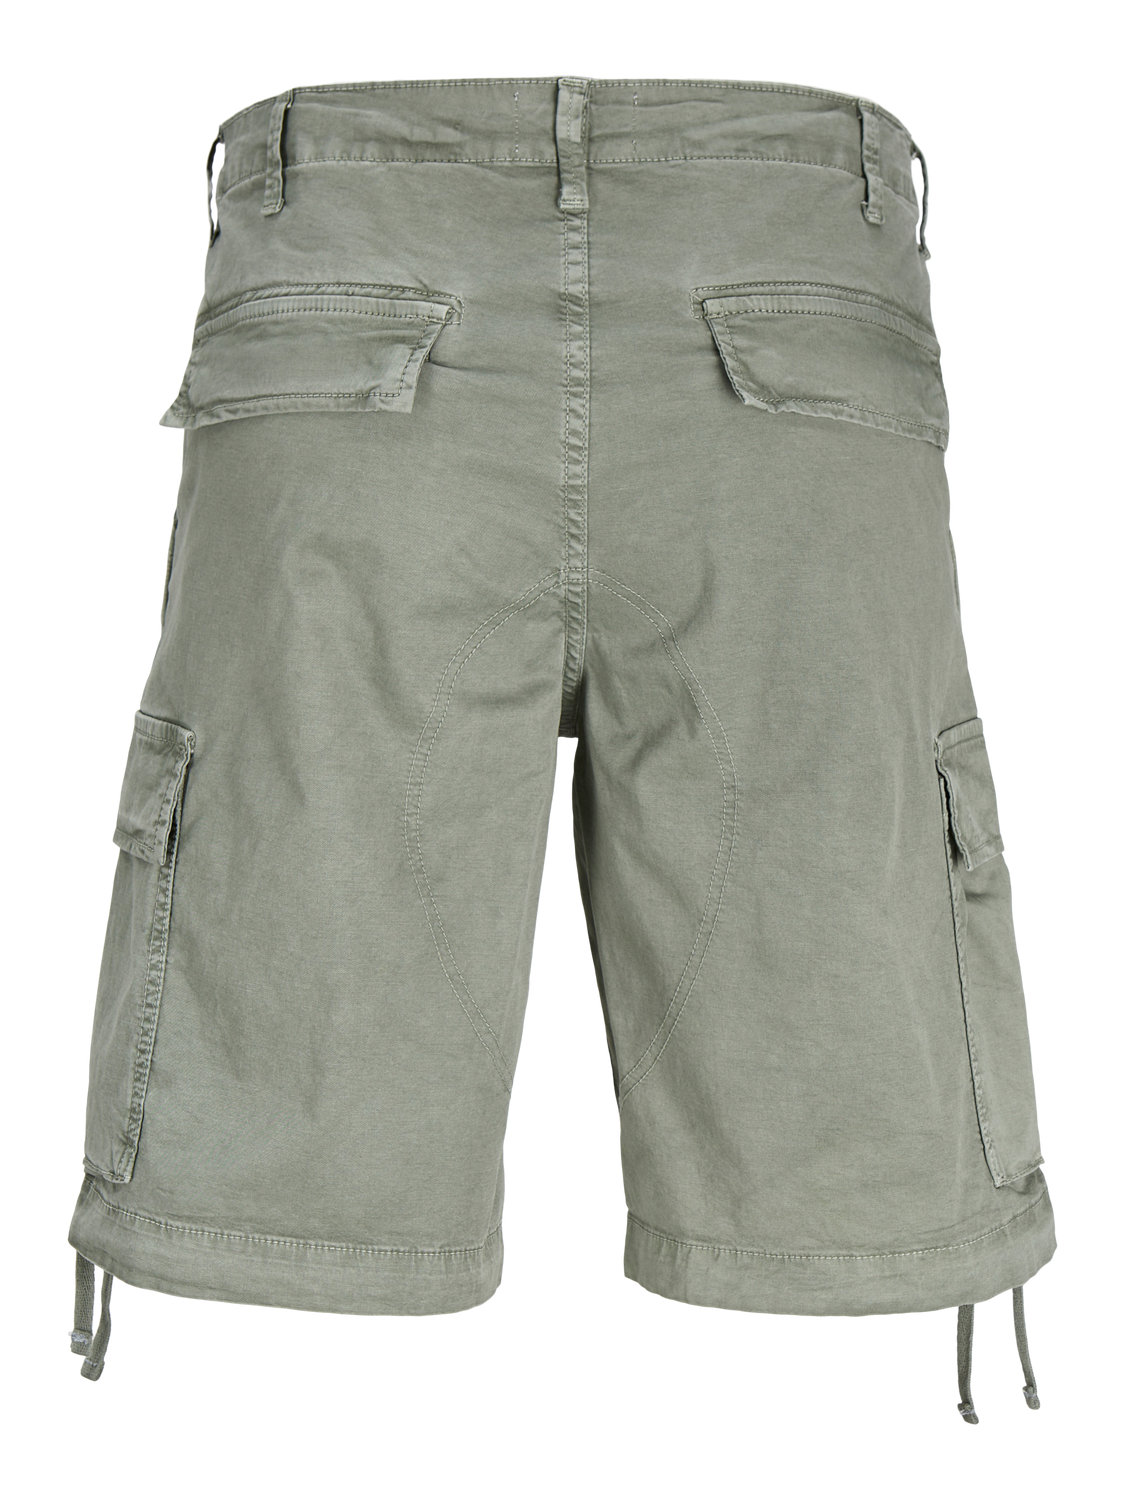 JPSTCOLE Shorts - Agave Green